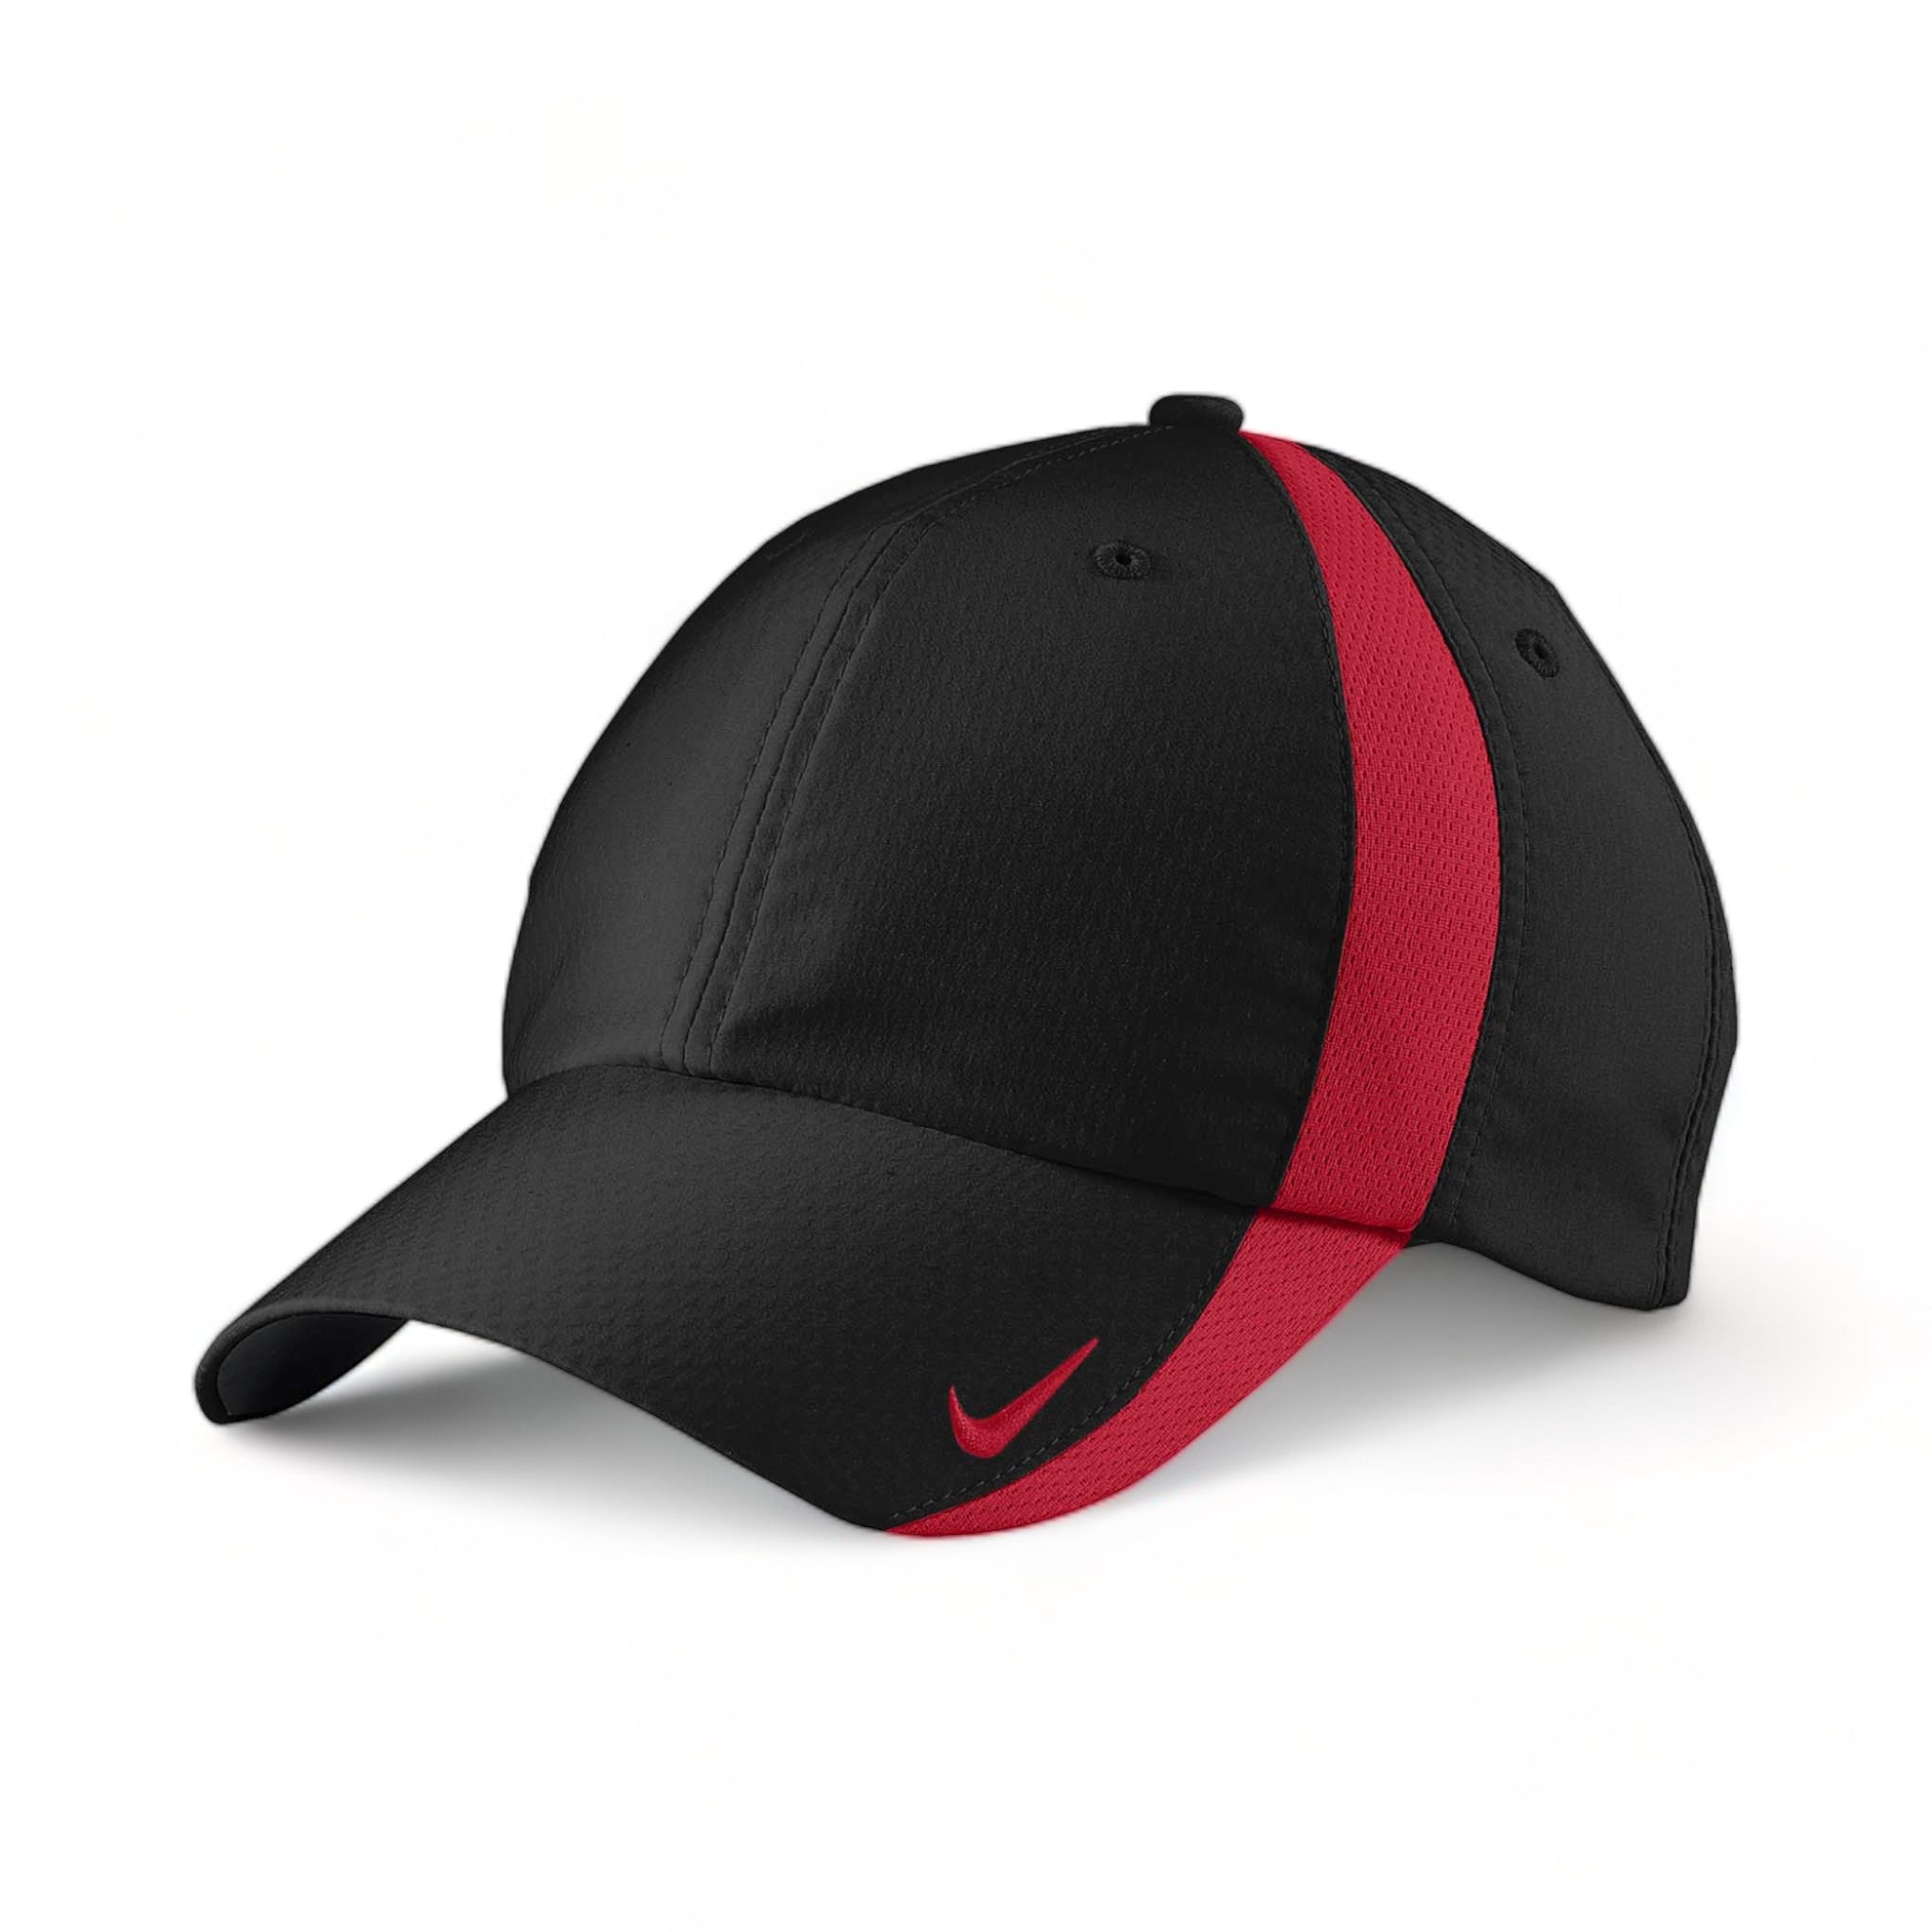 Side view of Nike NKFD9709 custom hat in black and gym red